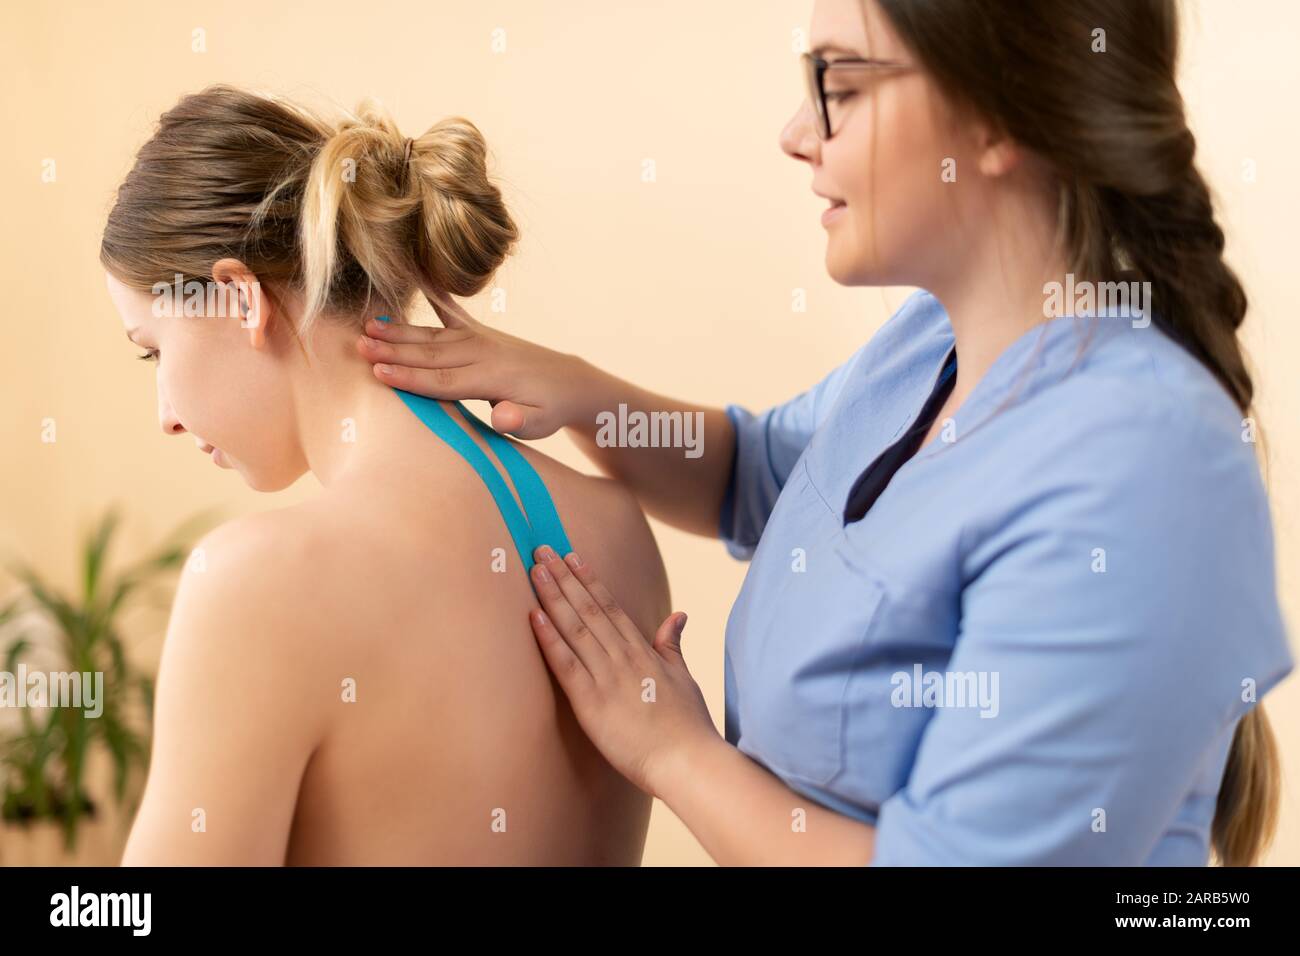 Female physiotherapist applying kinesio tape on patient's neck. Kinesiology, physical therapy, rehabilitation concept. Side view. Stock Photo